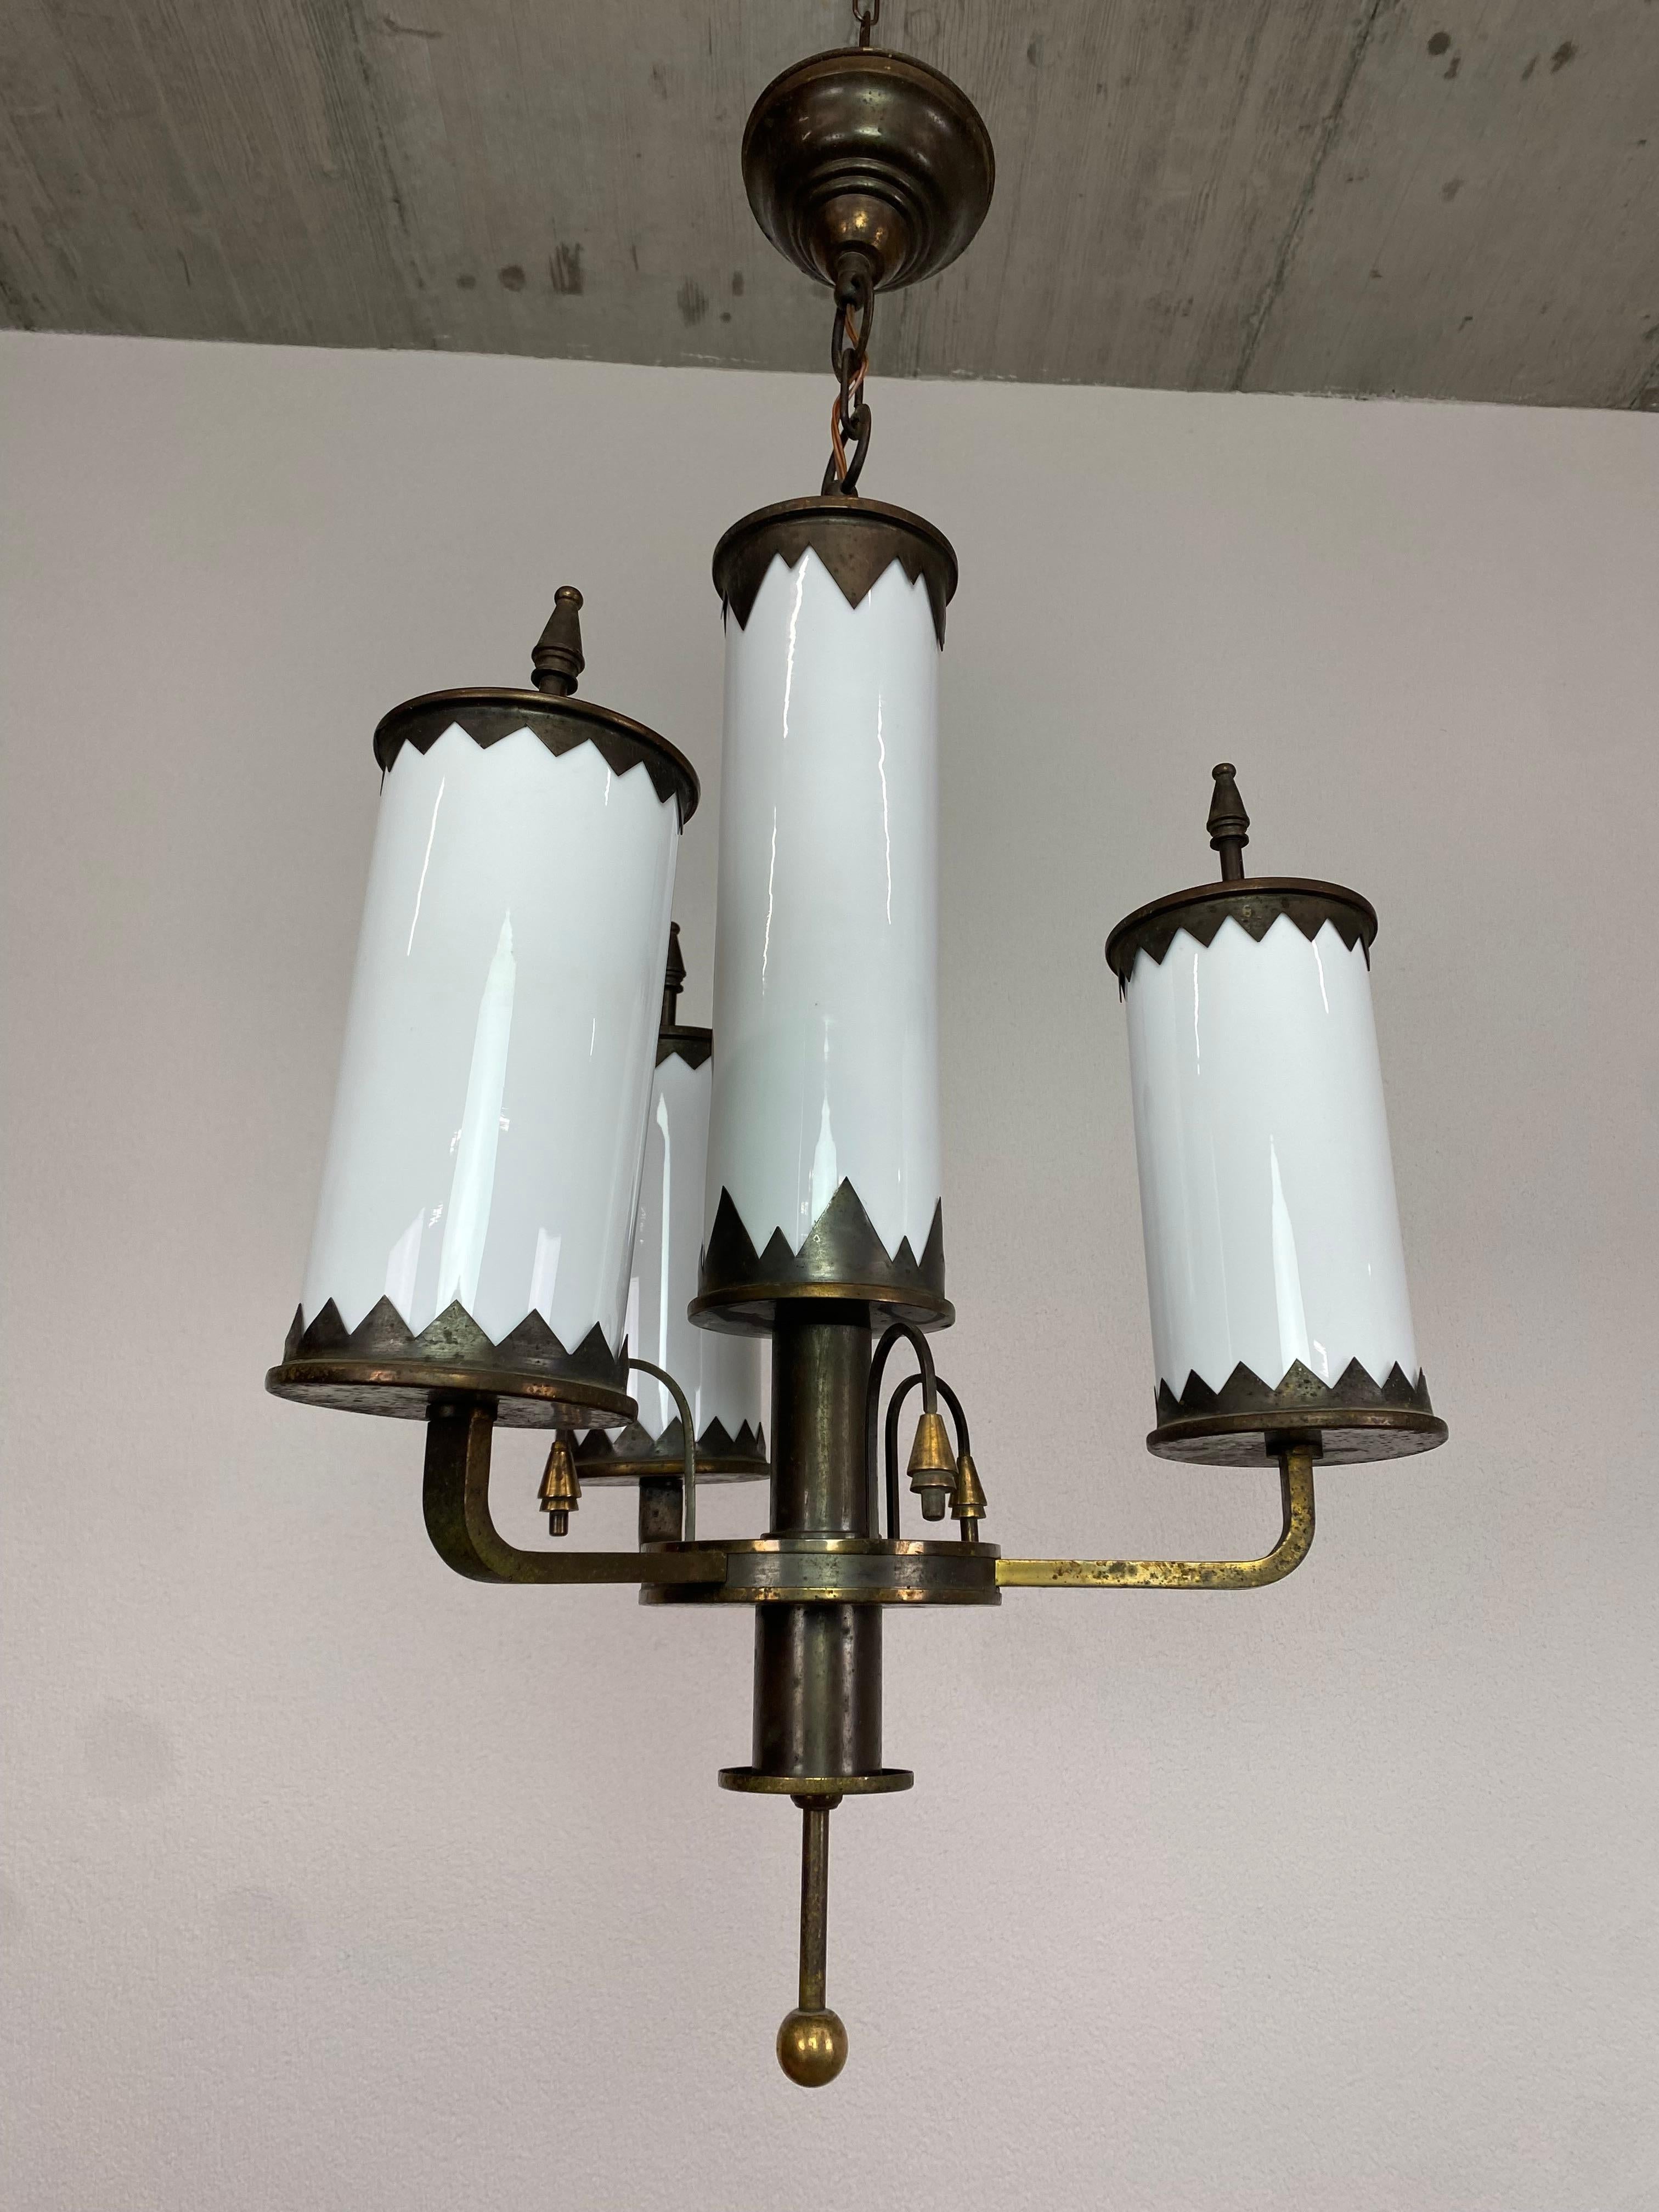 Rondocubist art deco brass hanging lamp with white glass lampshades.